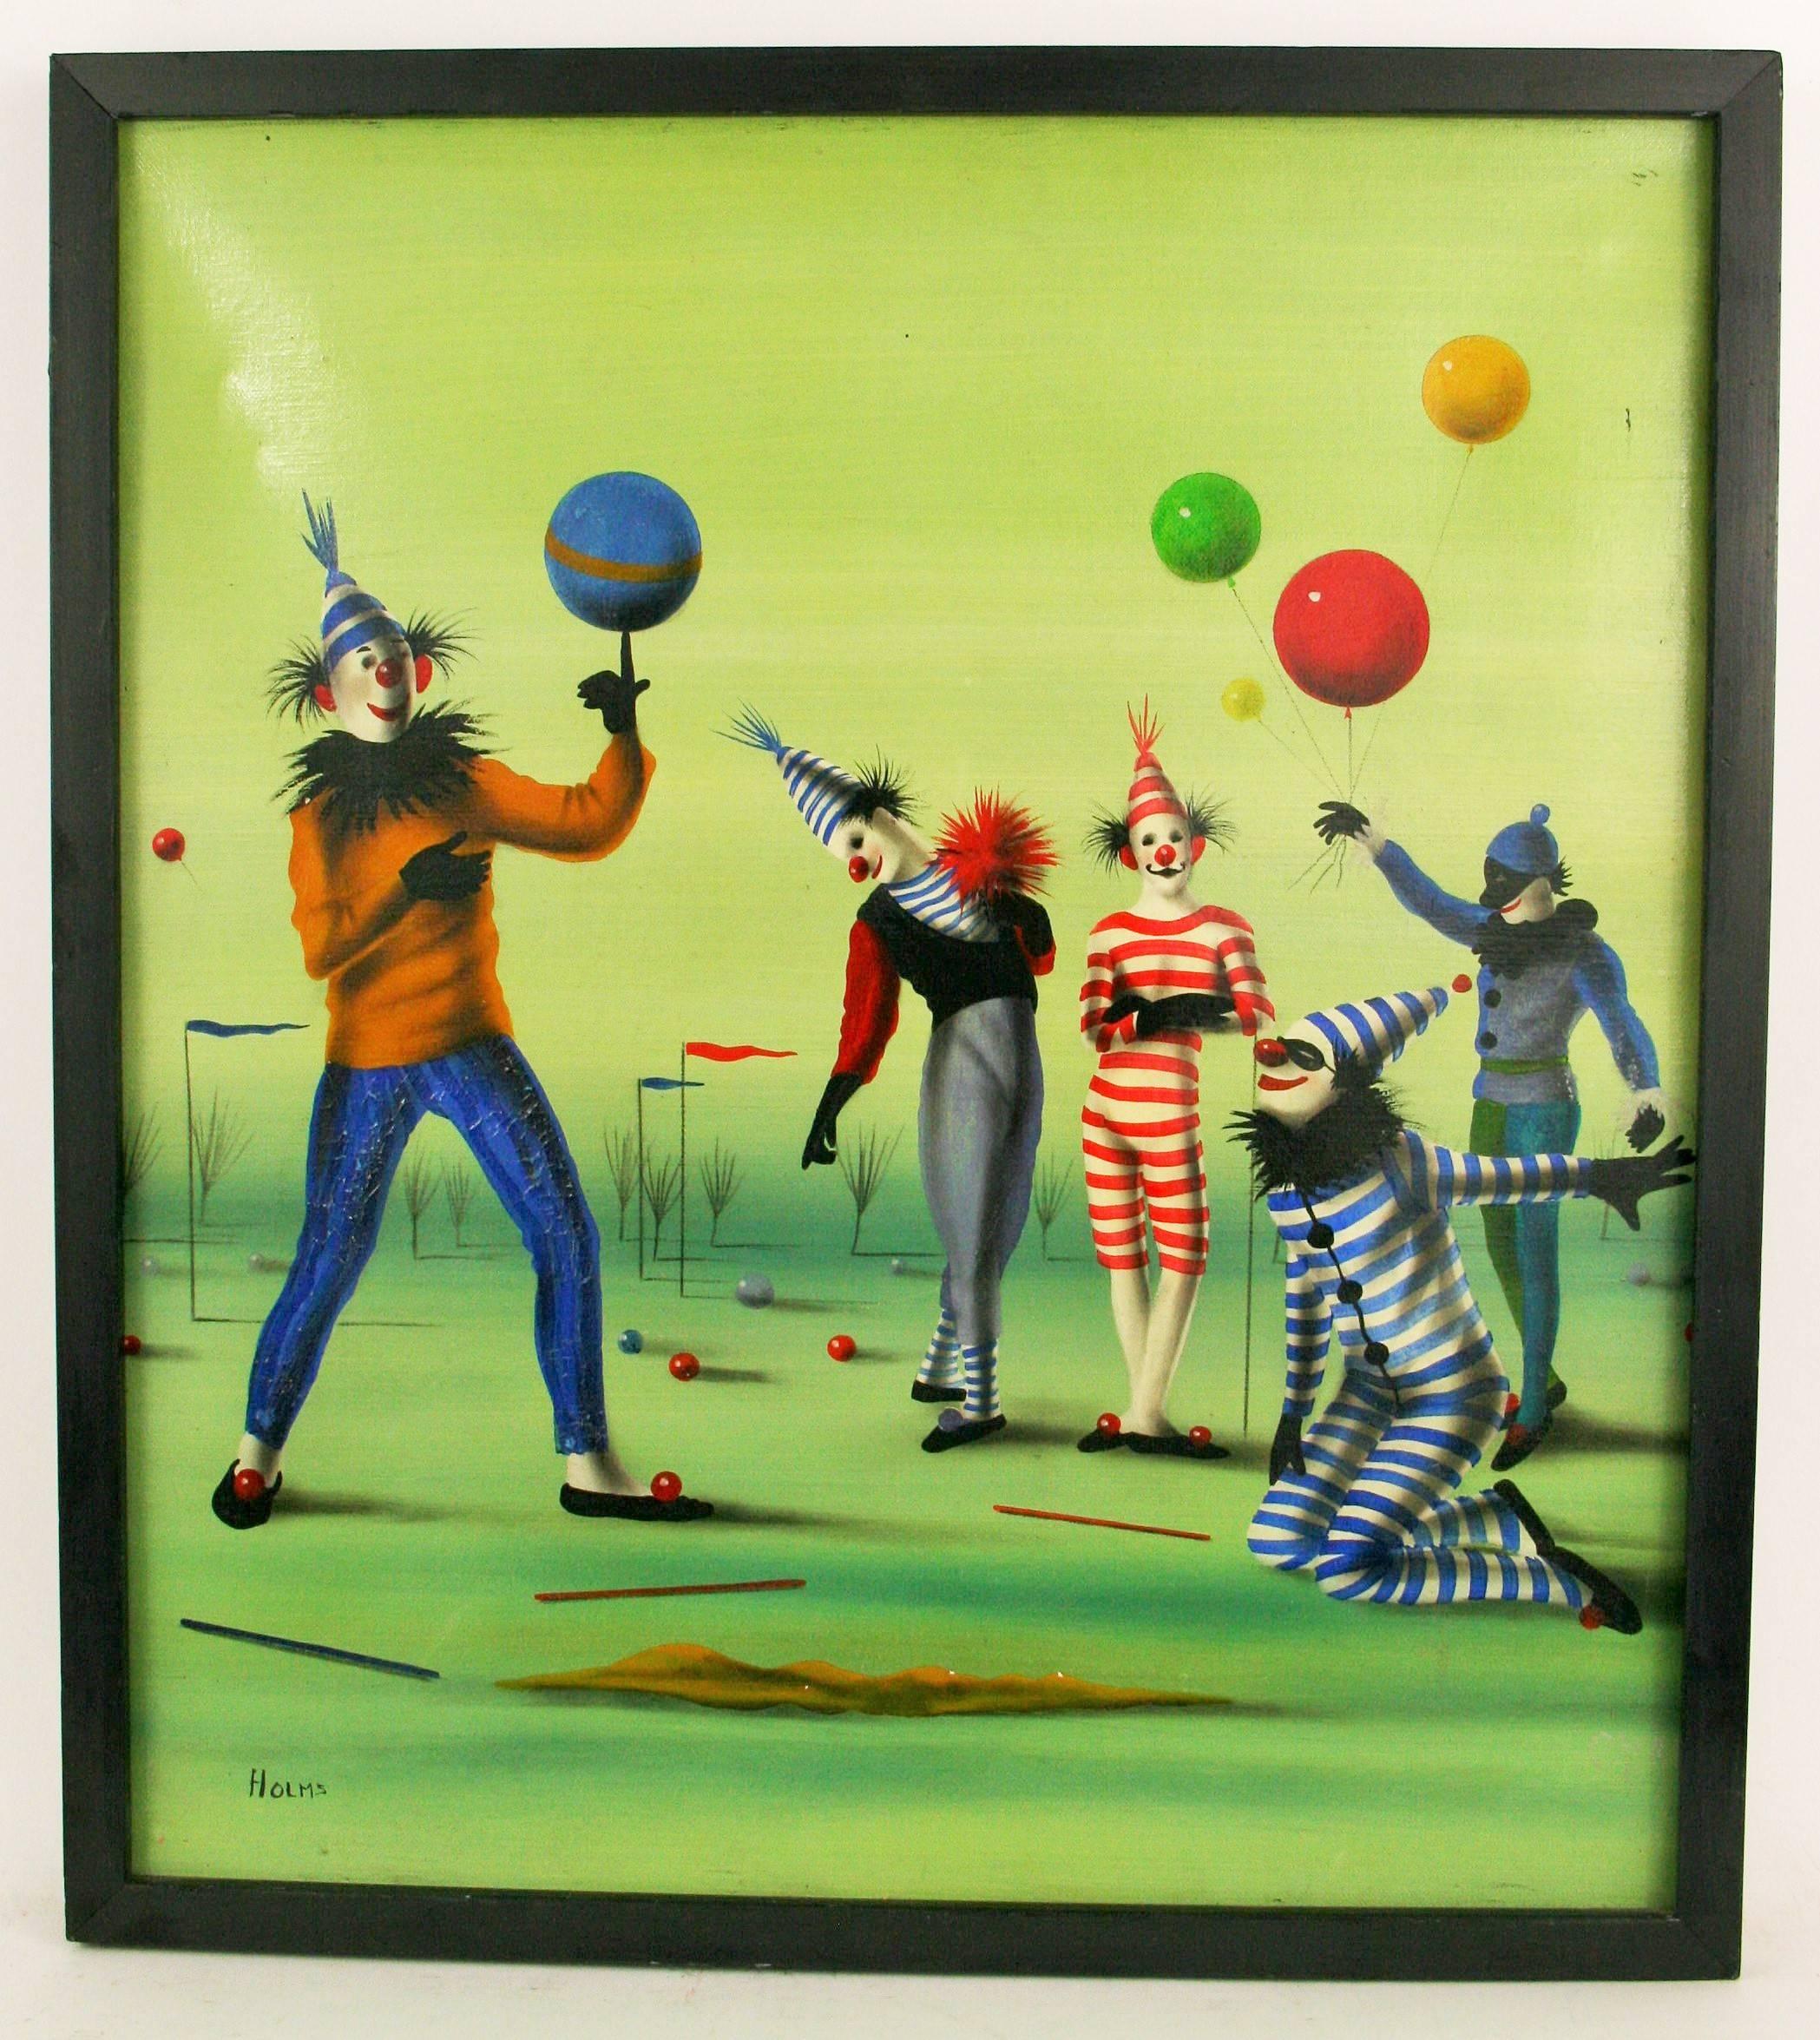 Holms Figurative Painting - Surreal Circus Clowns